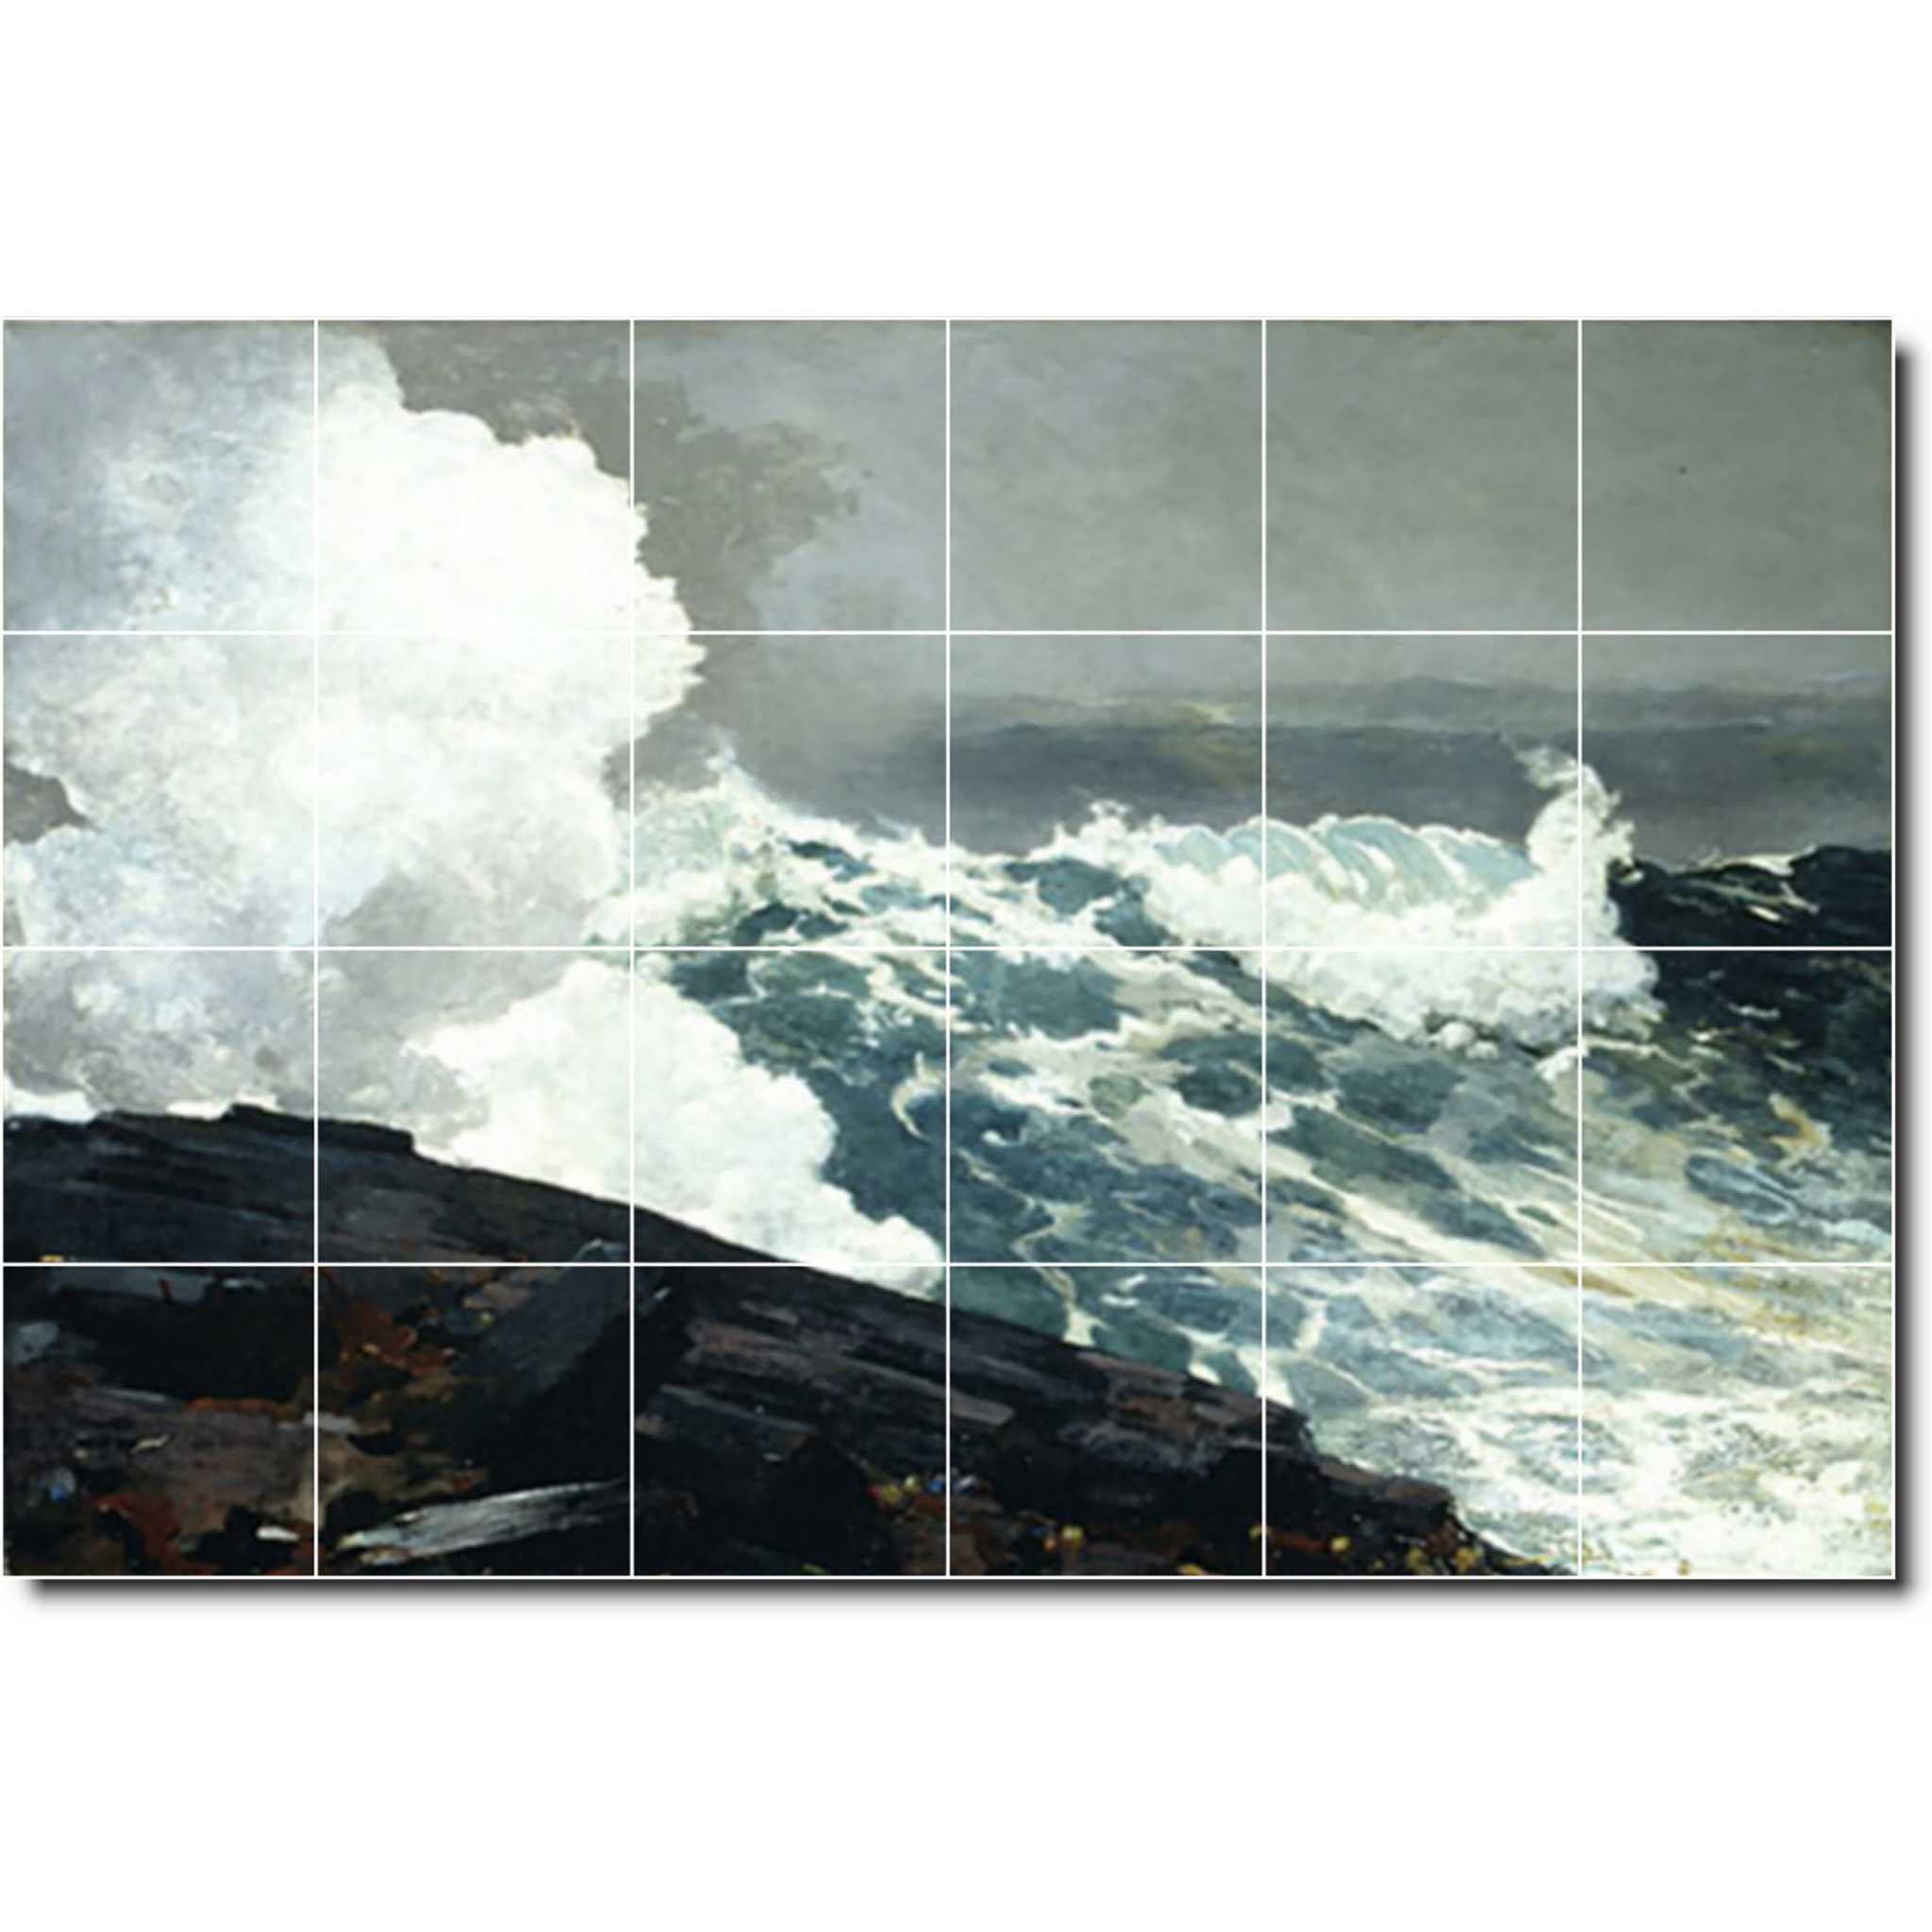 Winslow Homer Waterfront Painting Ceramic Tile Mural P04432-XL. 72"W x 48"H (24) 12x12 tiles